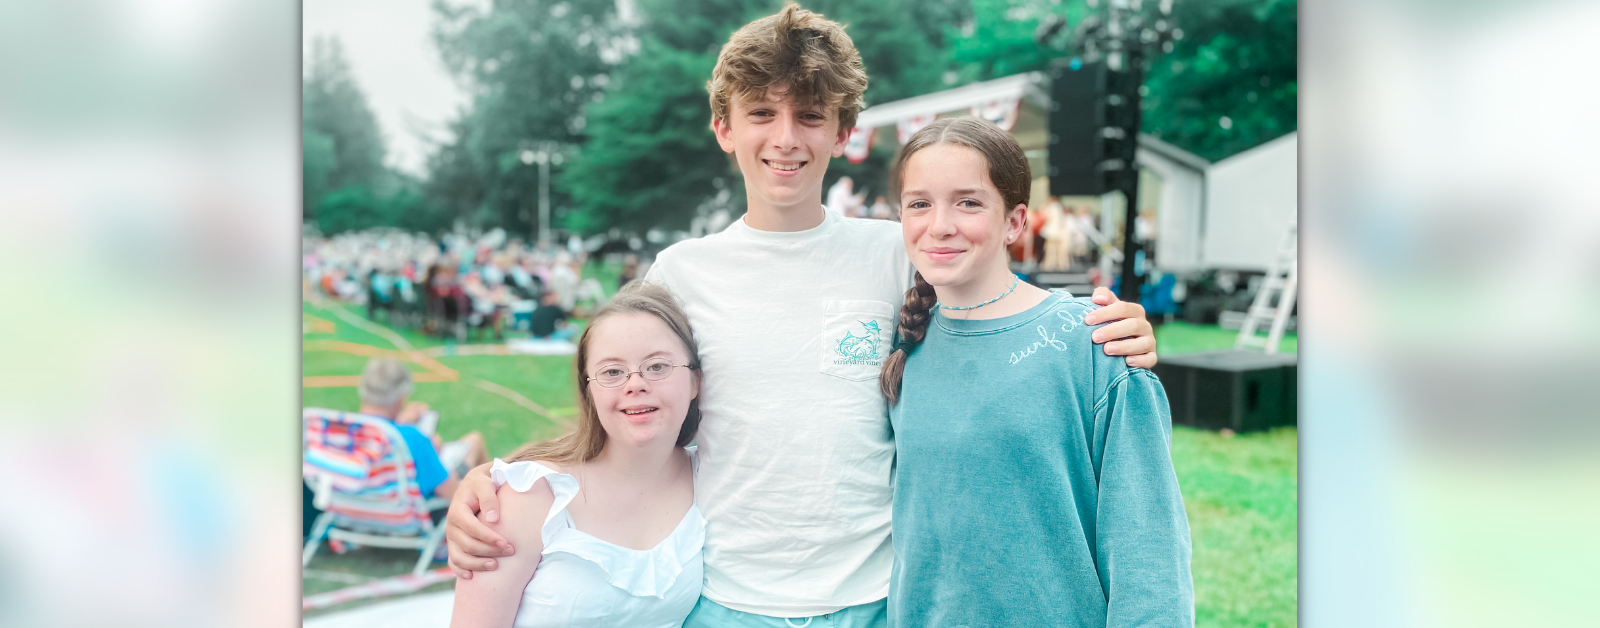 photo of Penny, William, and Marilee standing outside smiling at the camera with a seated crowd blurred in the background